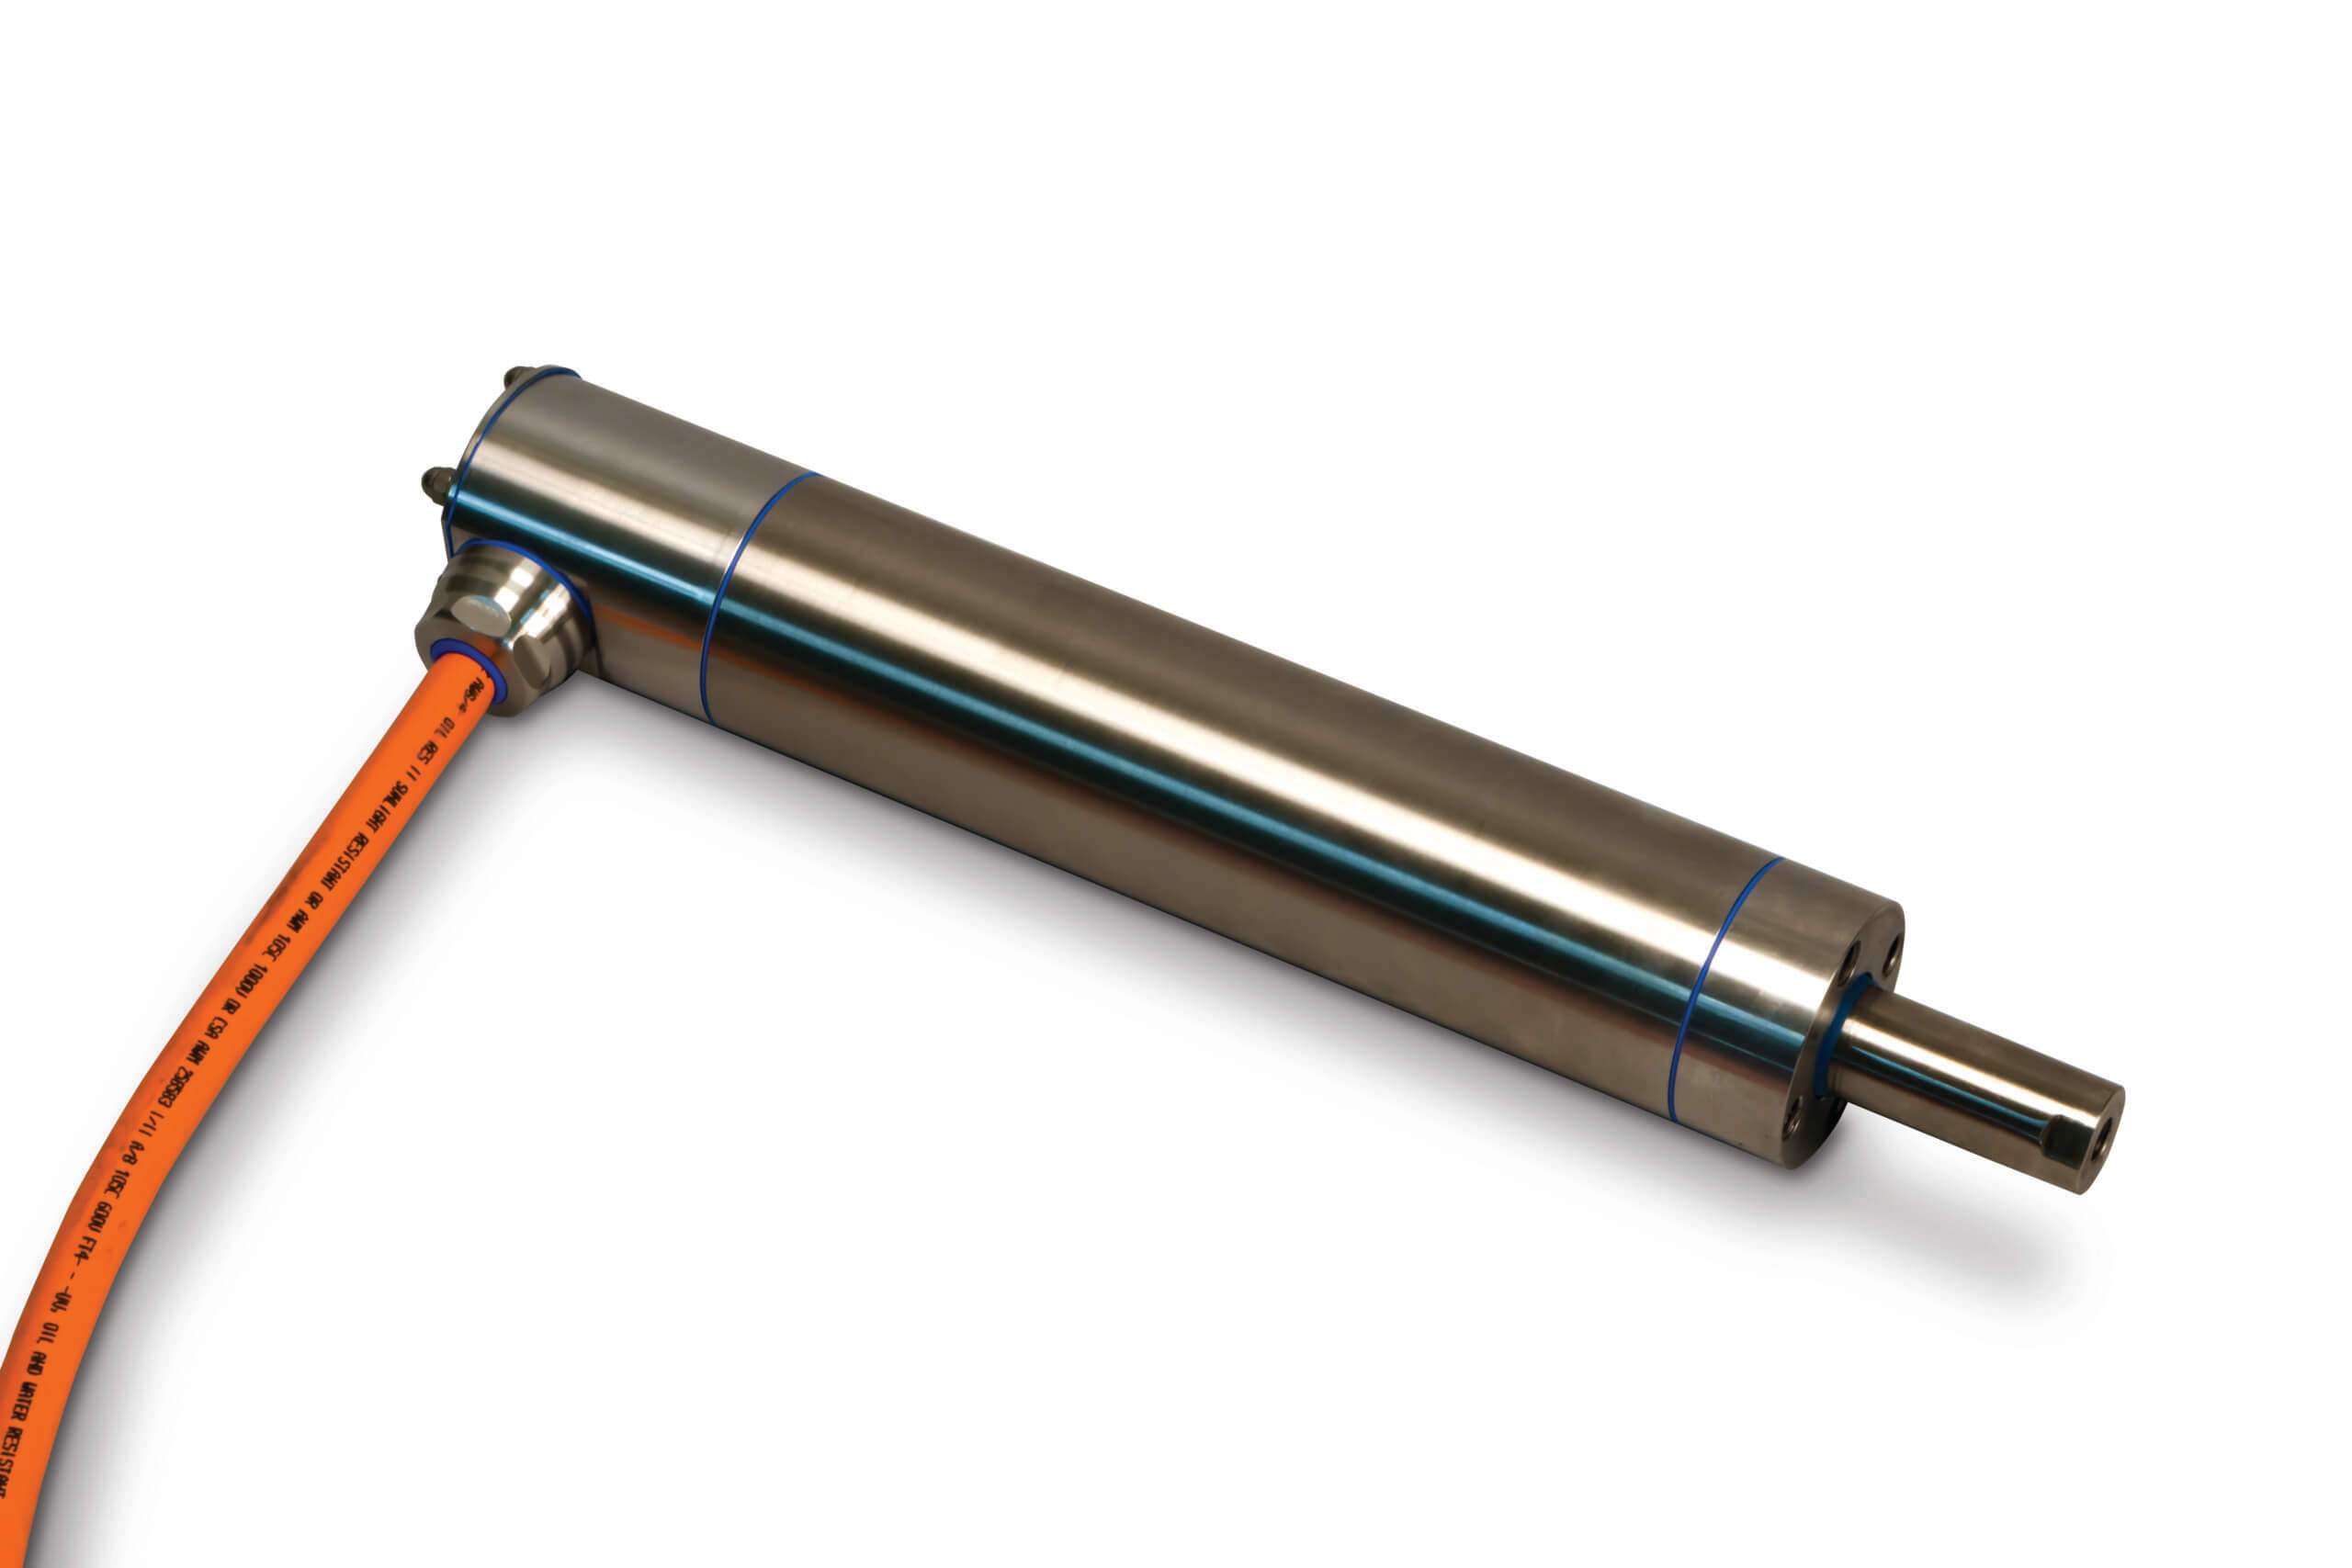 IMA linear servo actuator in stainless steel